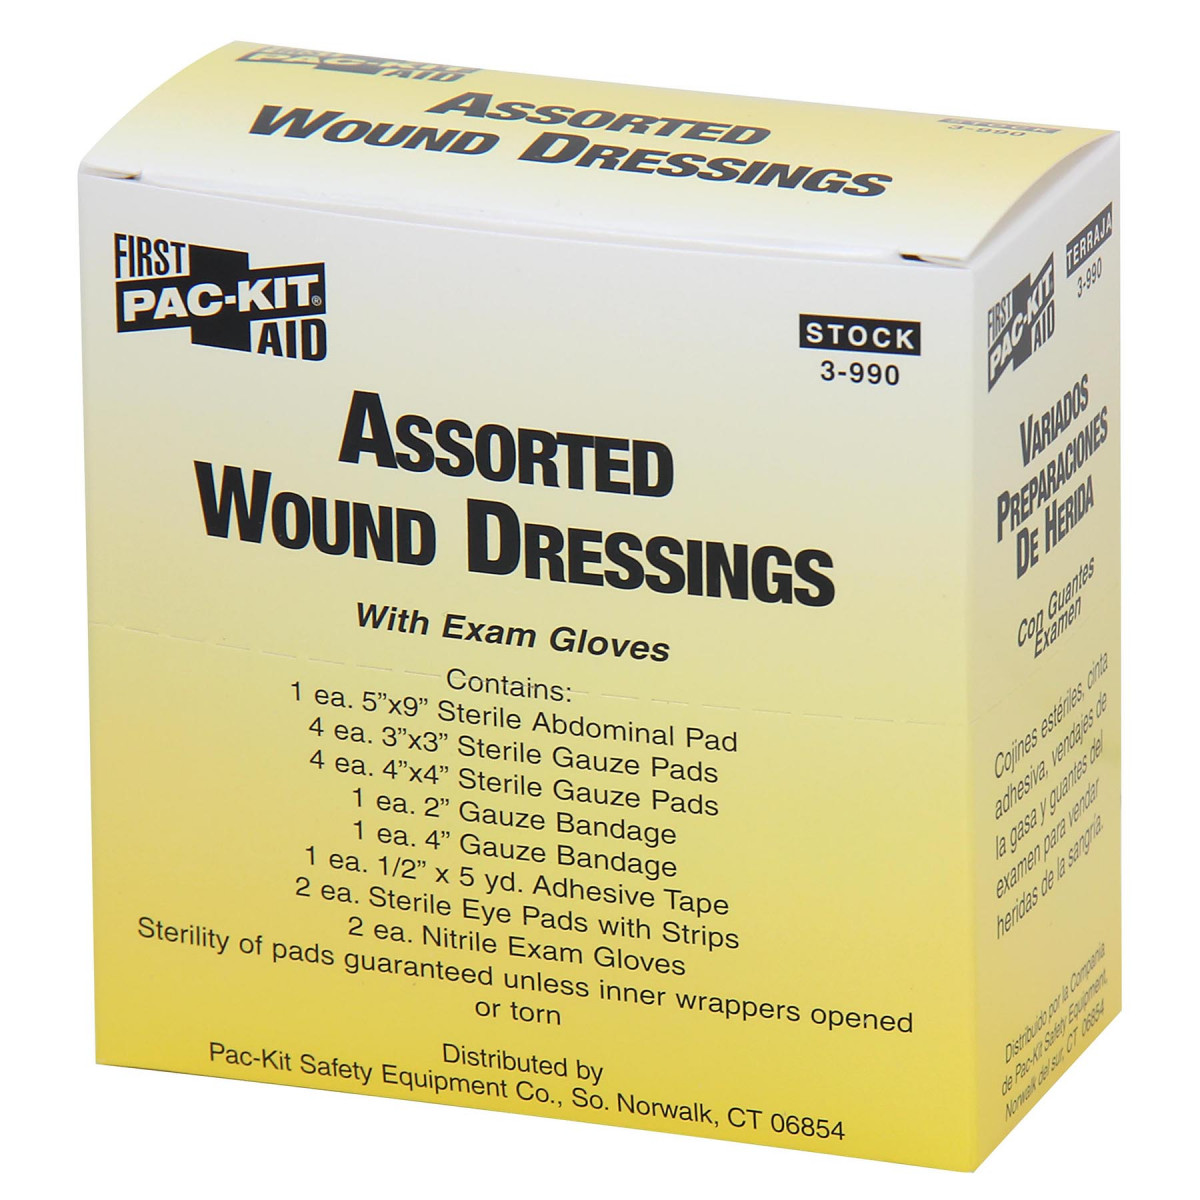 Large Wound Dressing Kit - First Aid Safety